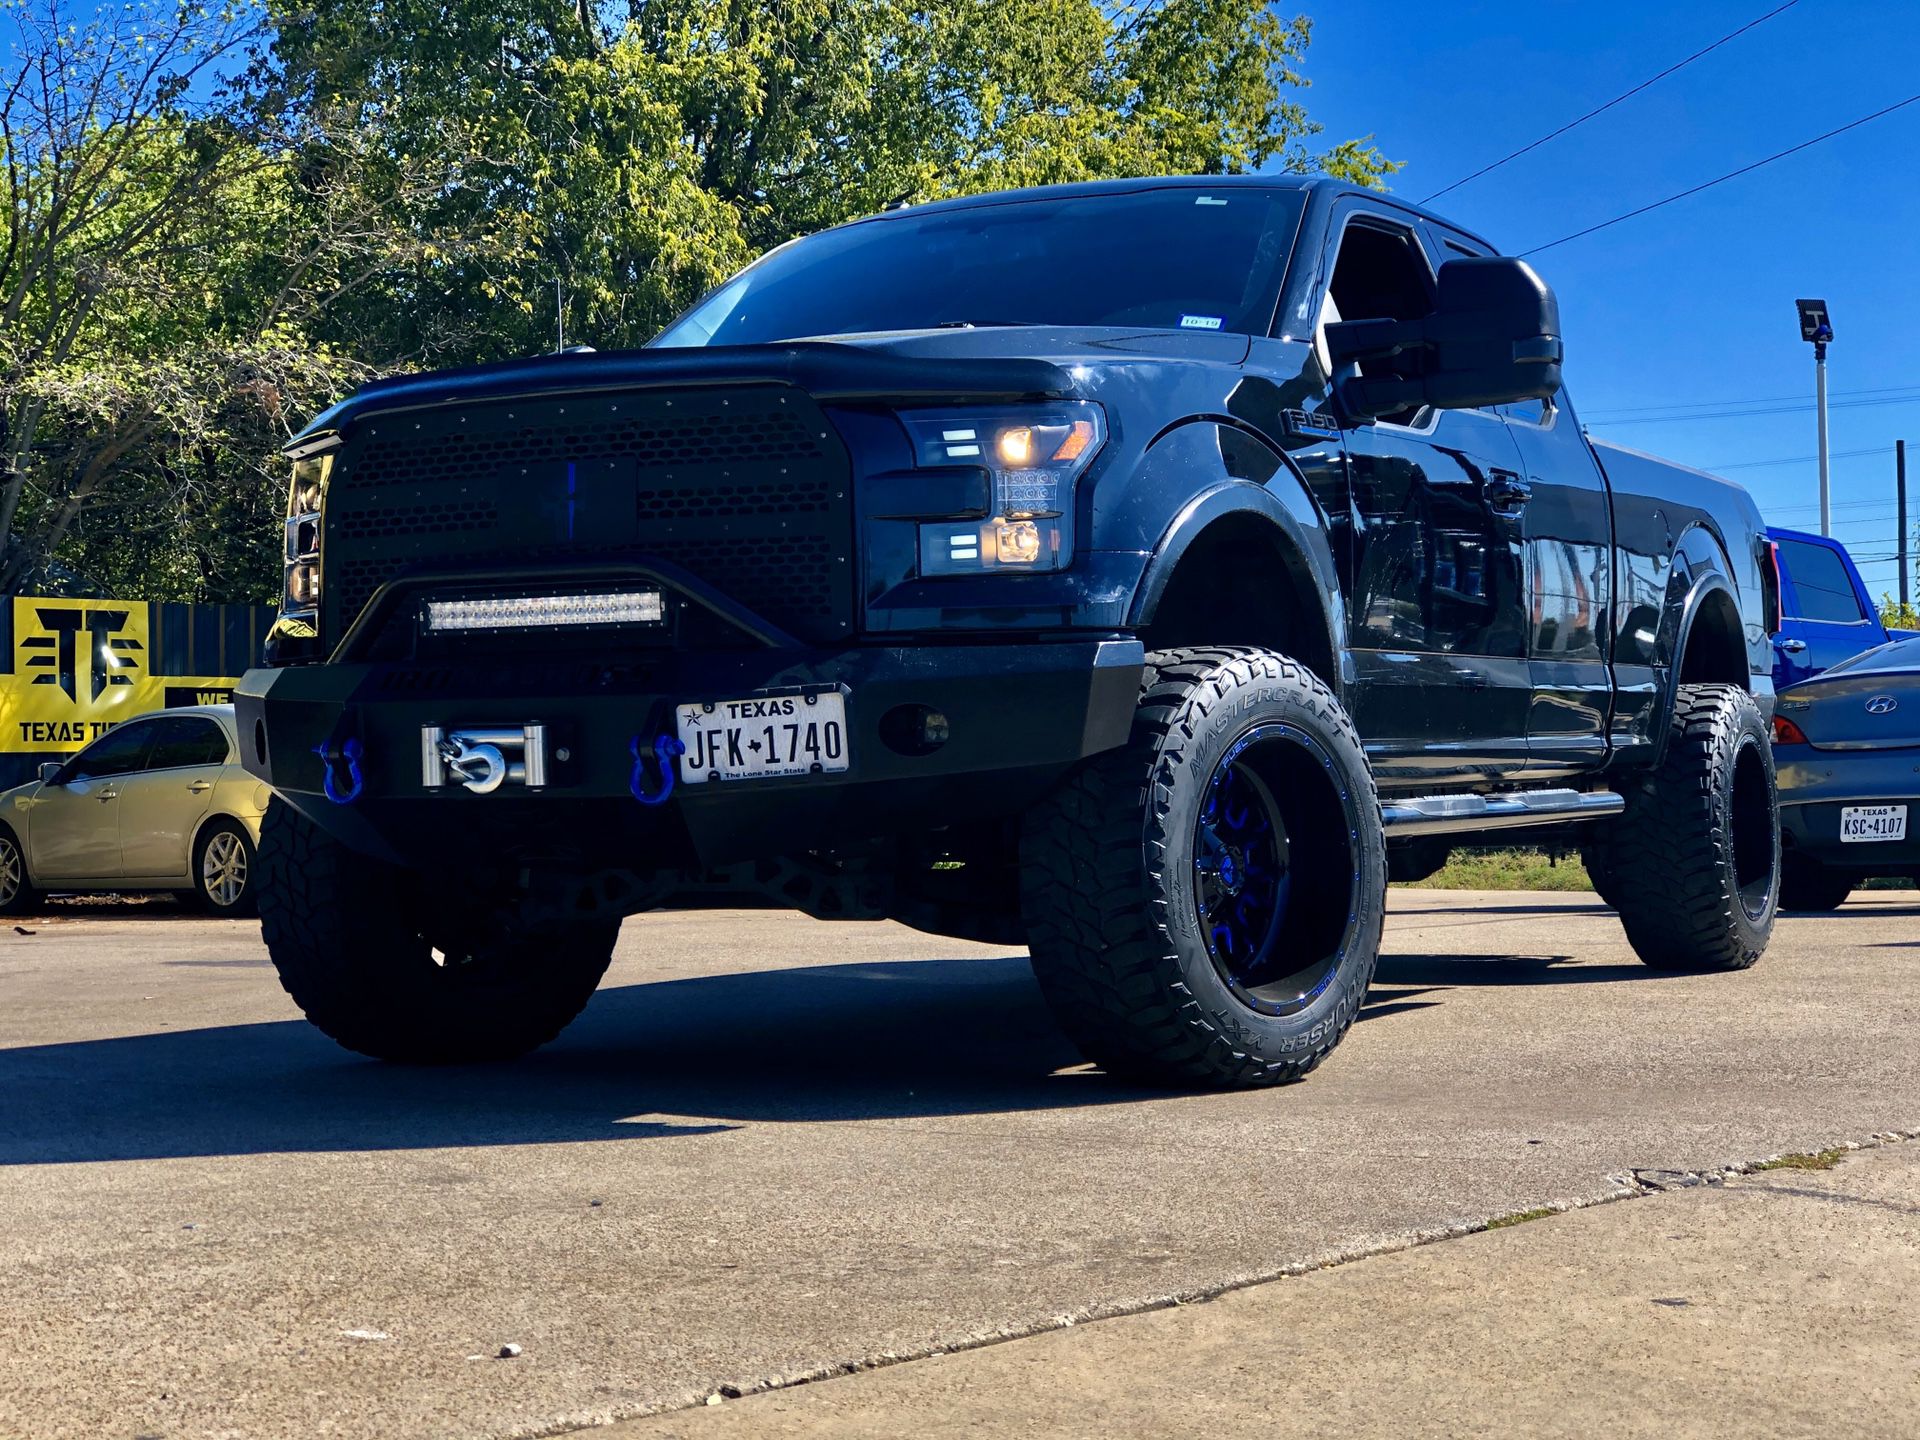 Lift kit packages!